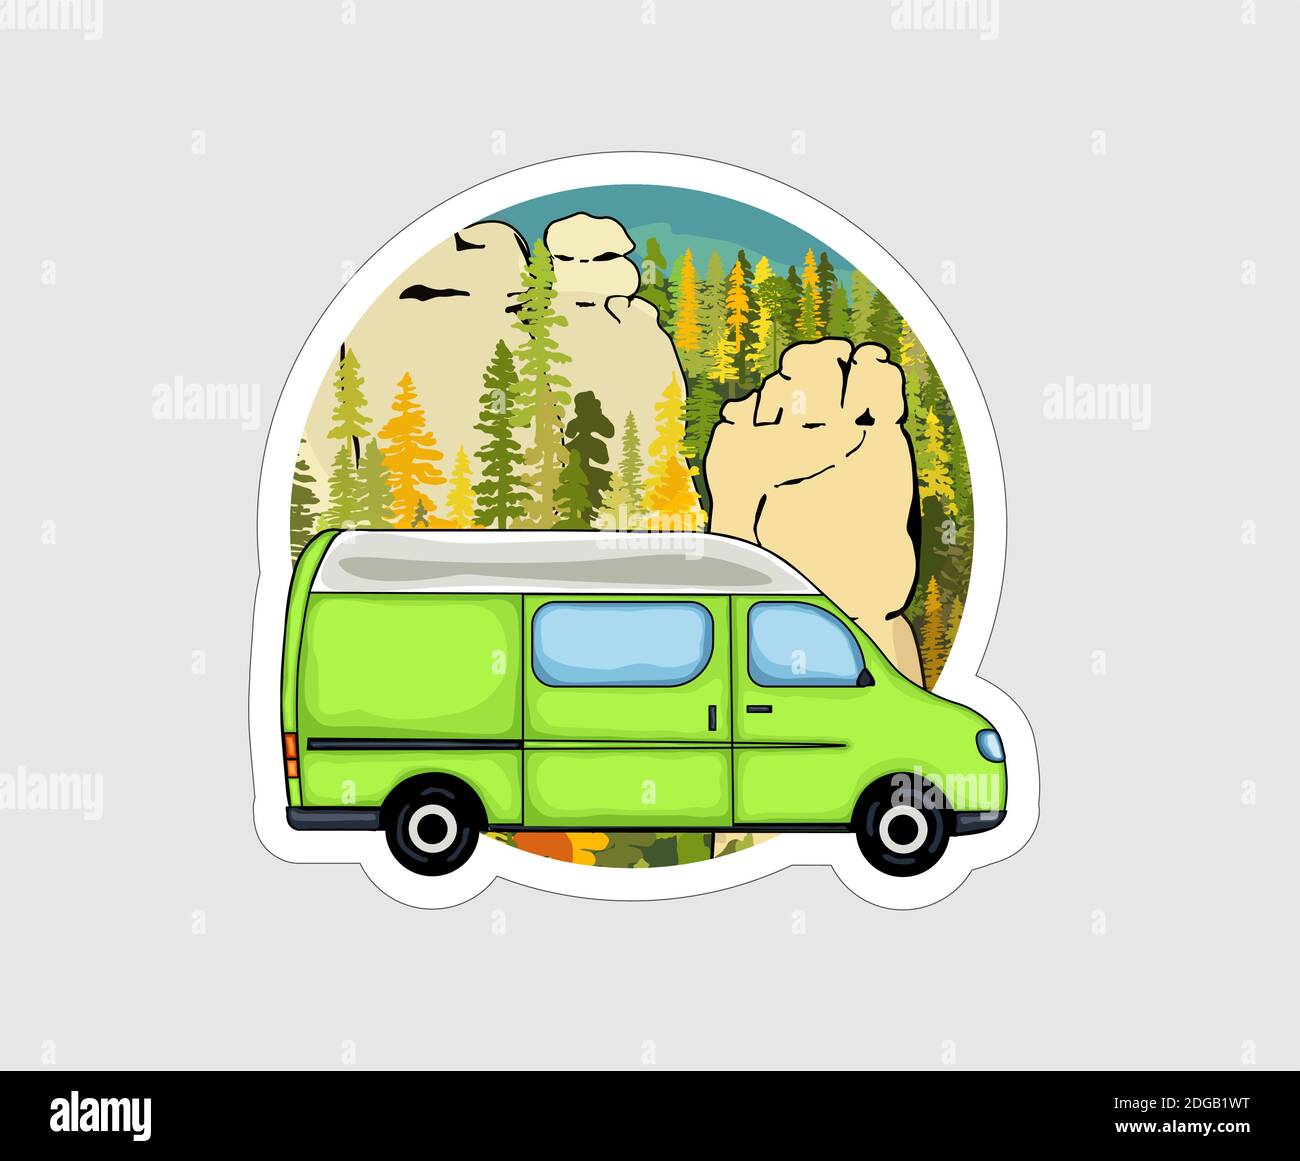 Van with sandstone formation and forest in the background. Van life badge, illustration. Stock Vector